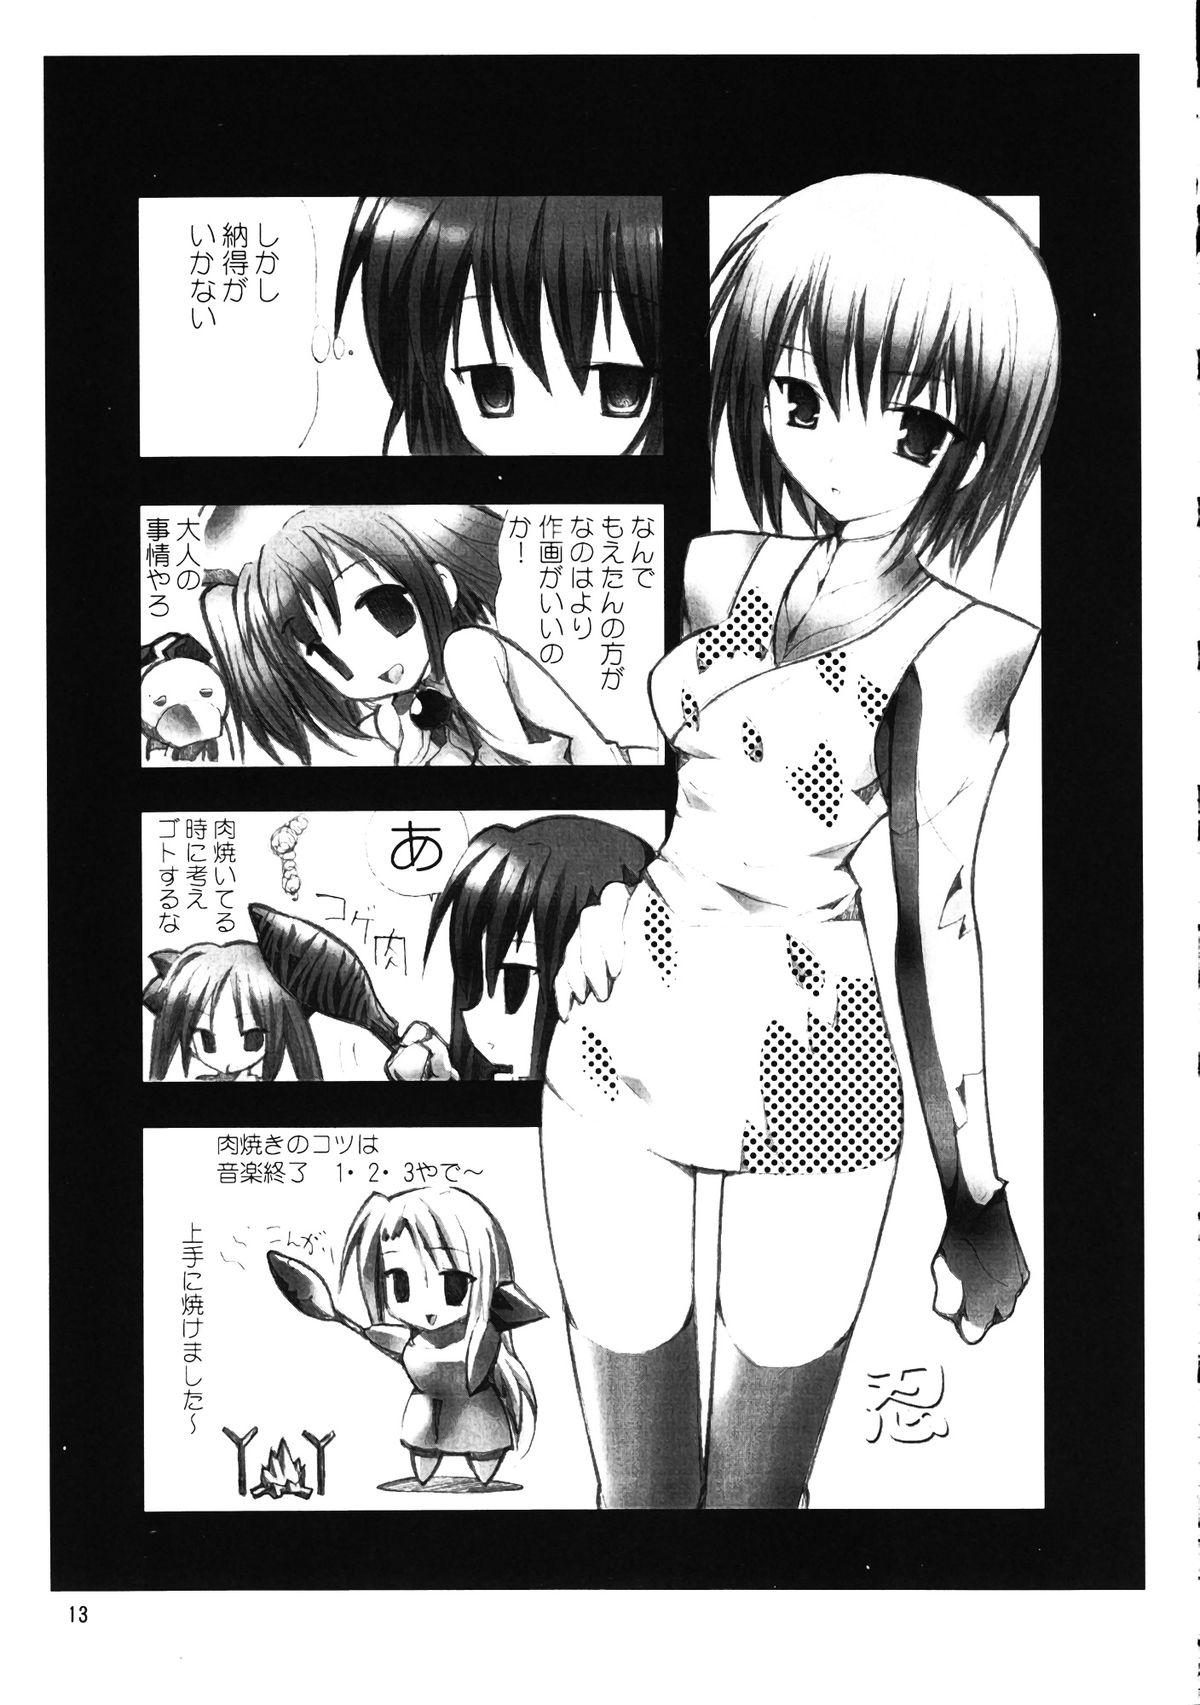 Food Megaton Punch 9 Mega Pan - Lucky star Full Movie - Page 12